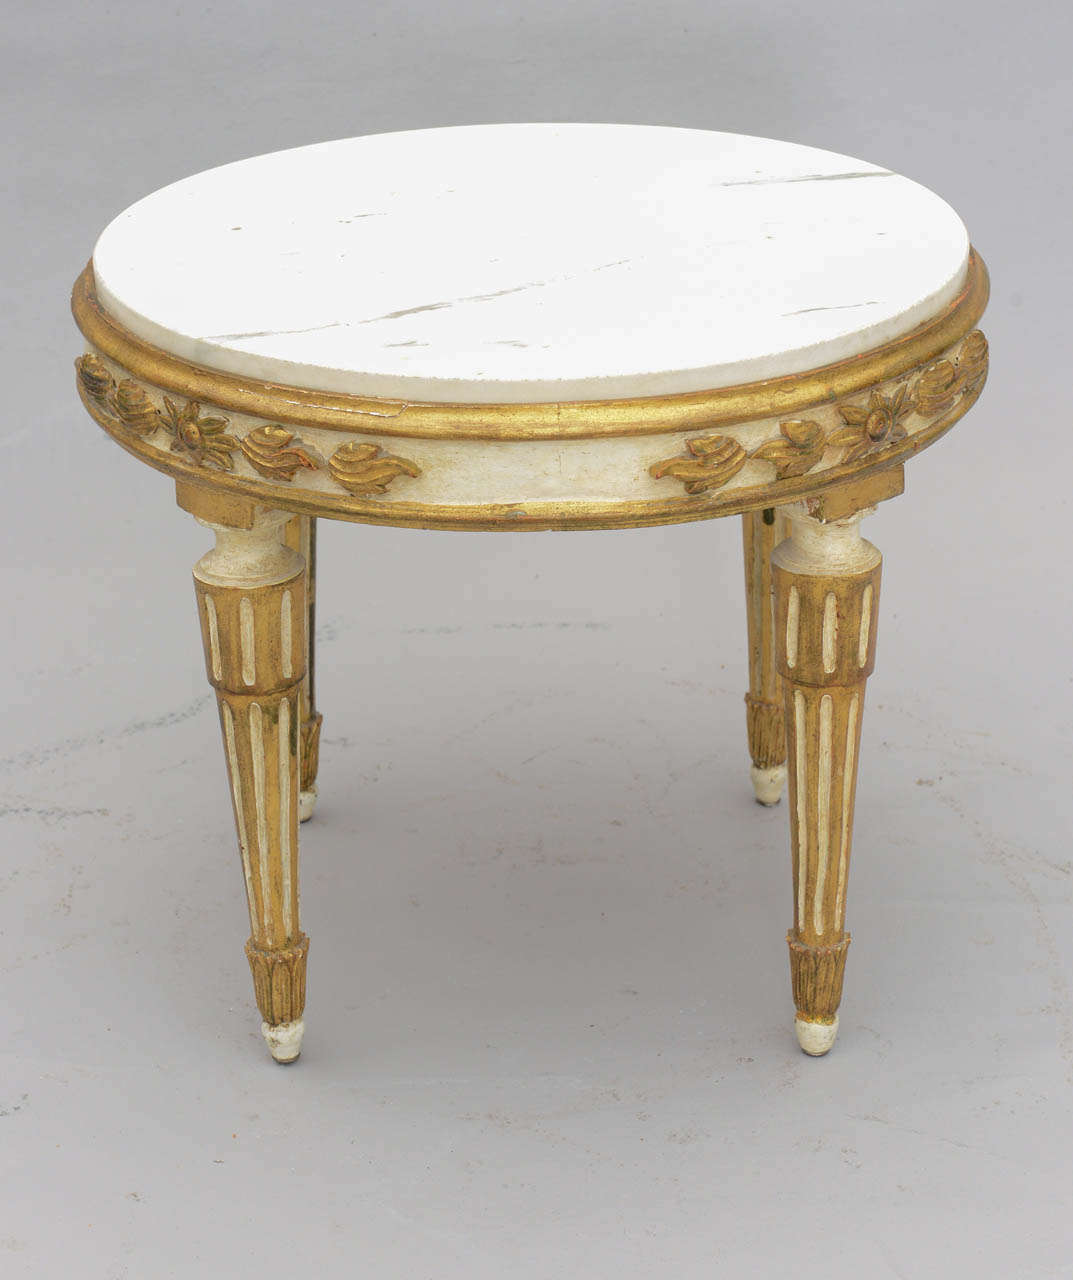 Round accent table, having white veined marble top inset in painted and parcel giltwood frame, its apron carved with foliate and laurel leaf details; raised on round fluted legs.

Stock ID: D6725